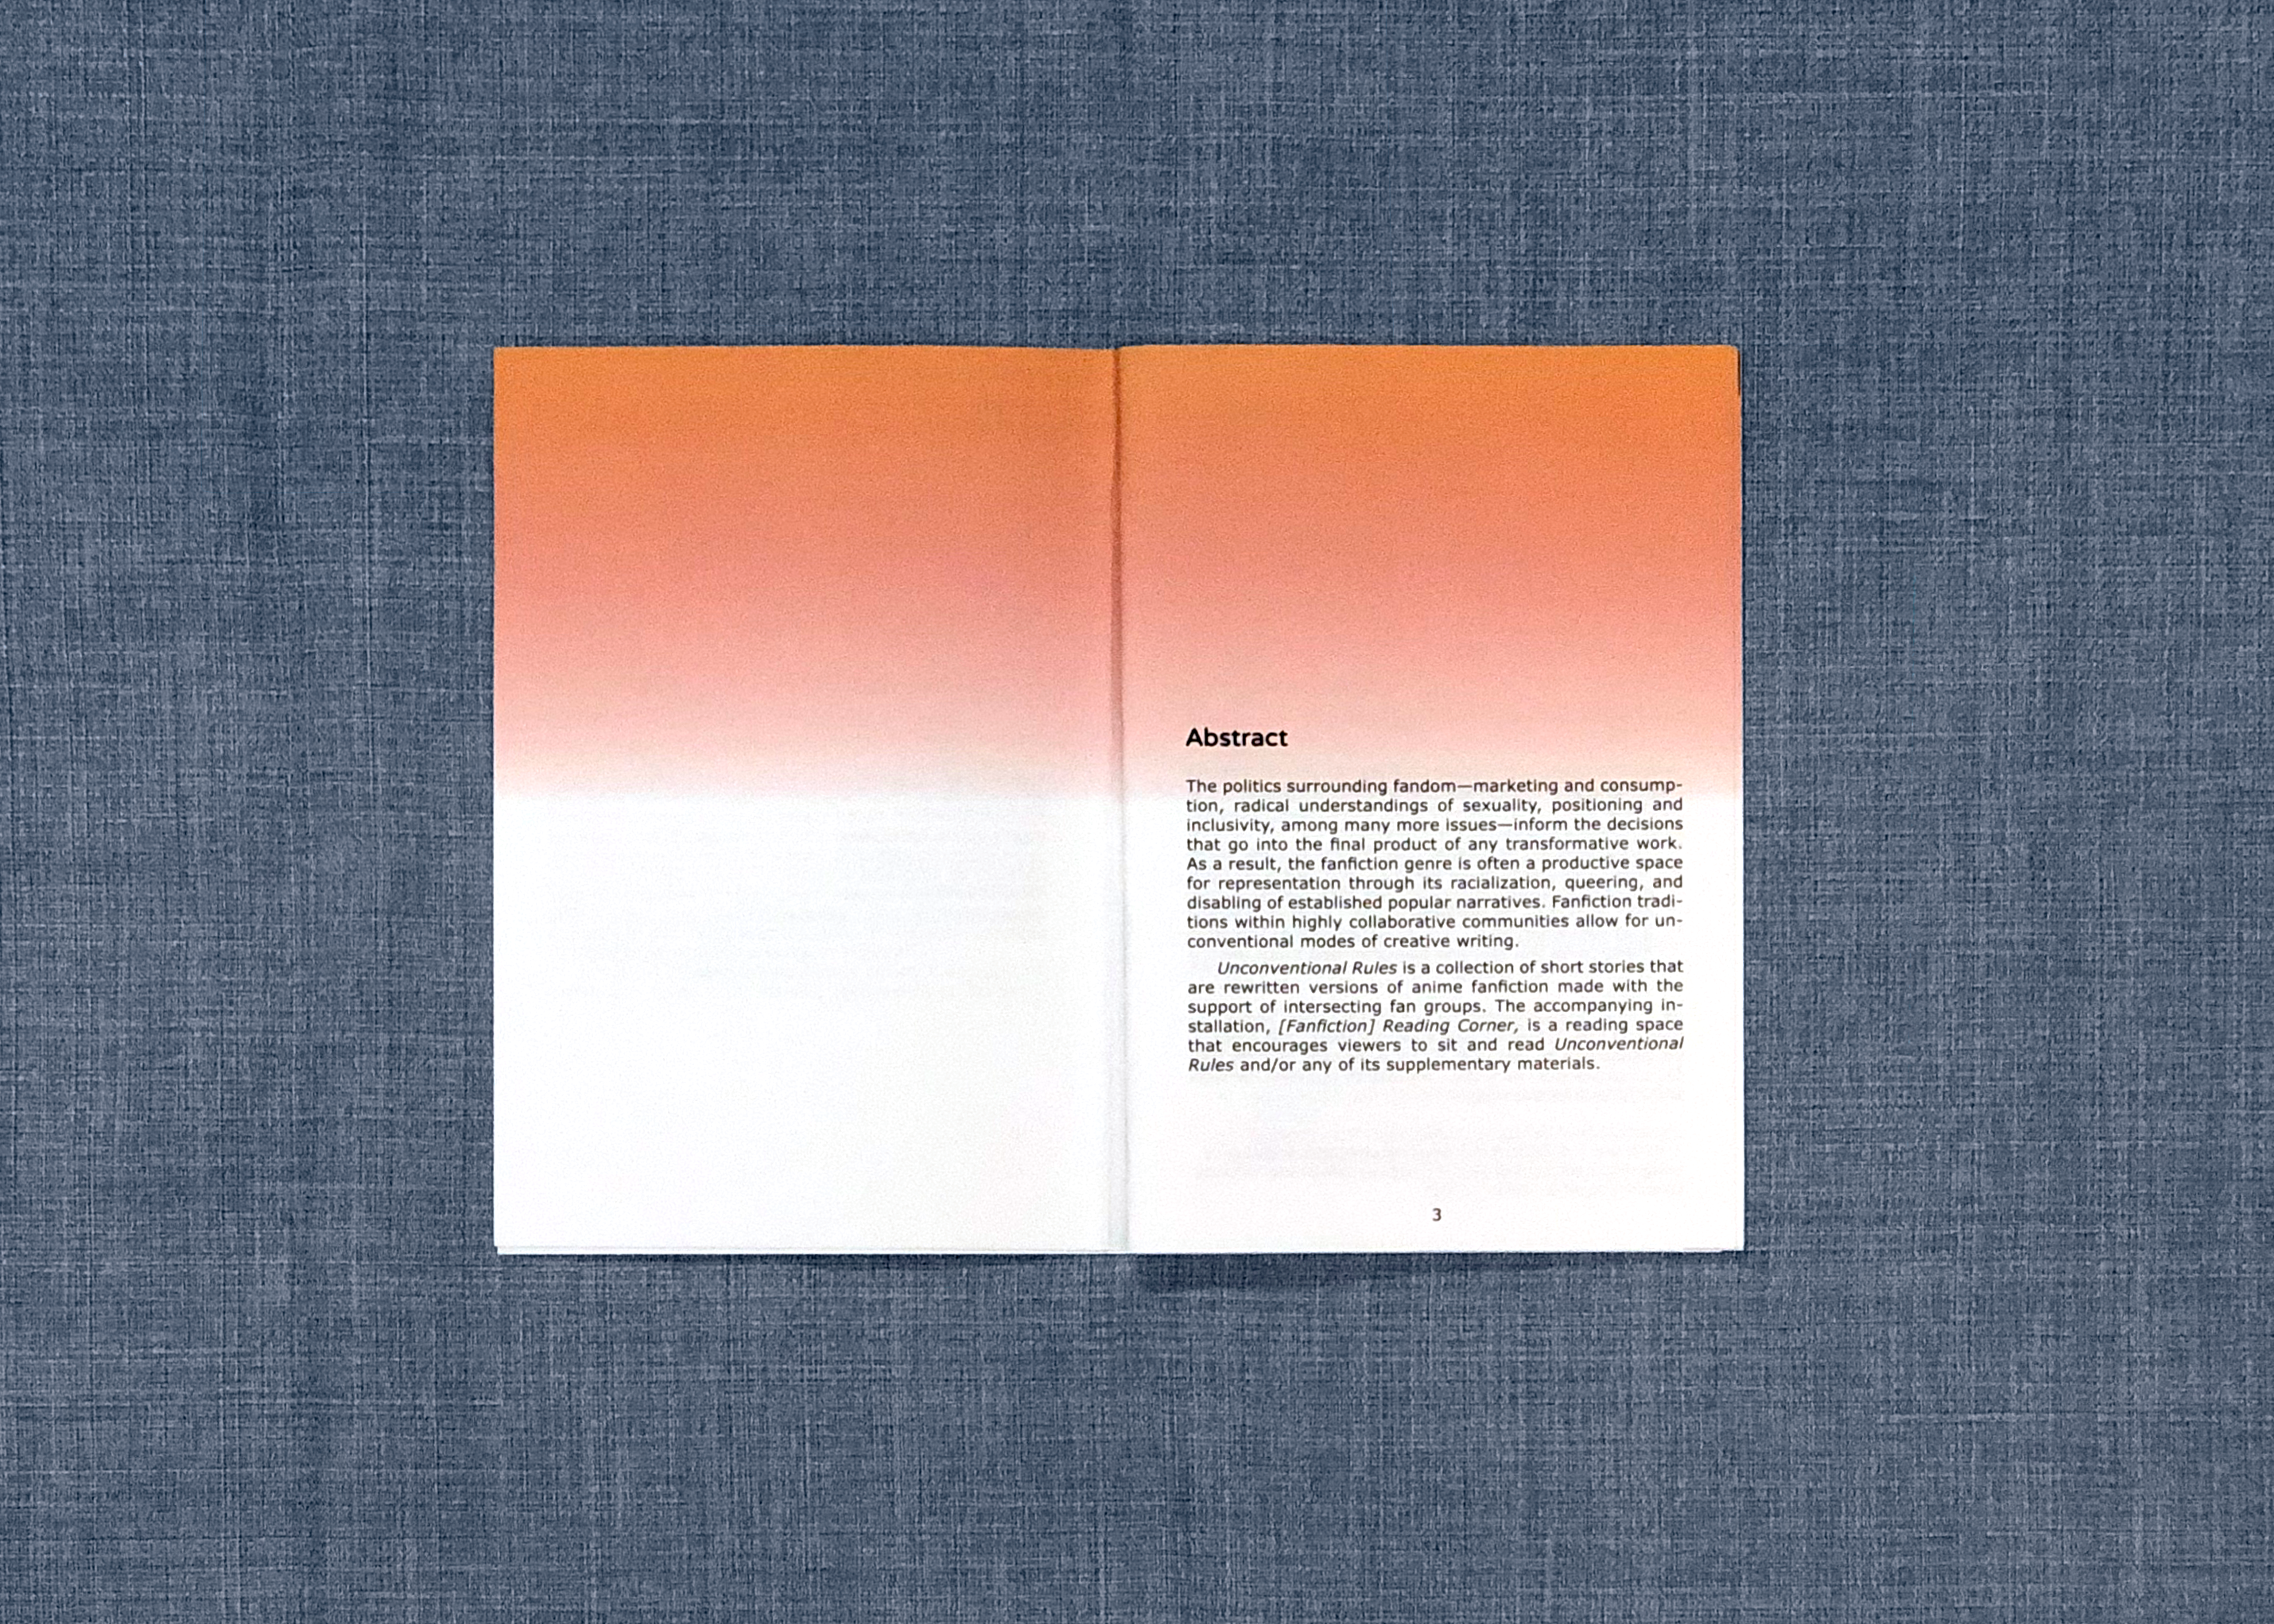 The opening spread of the OFACS zine displaying the zine's information (the abstract).